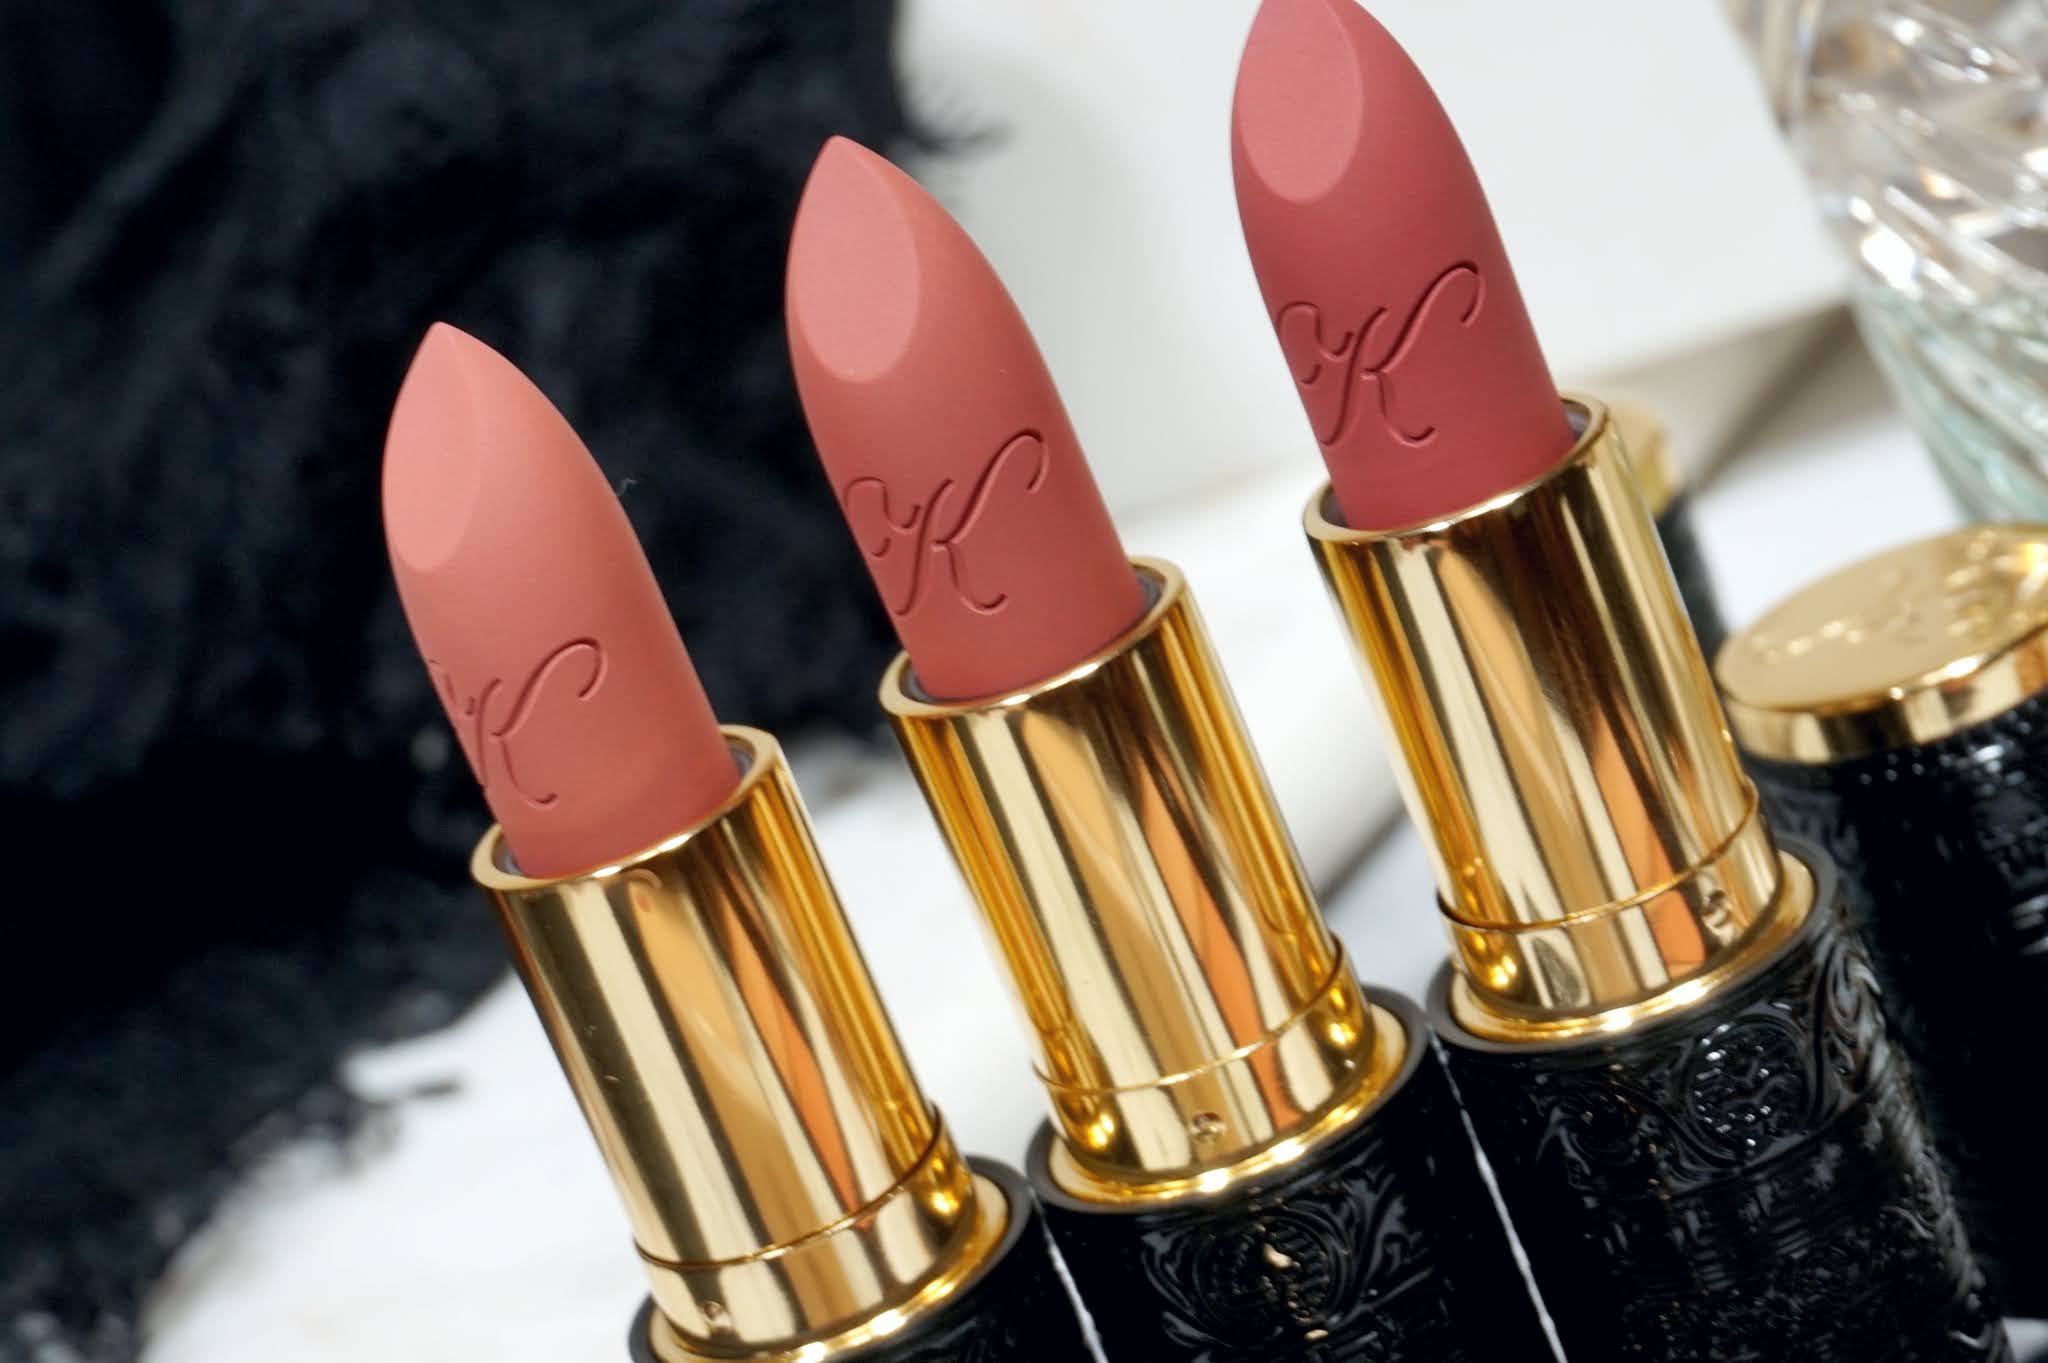 Kilian Le Rouge Parfum Scented Matte Lipstick Review and Swatches